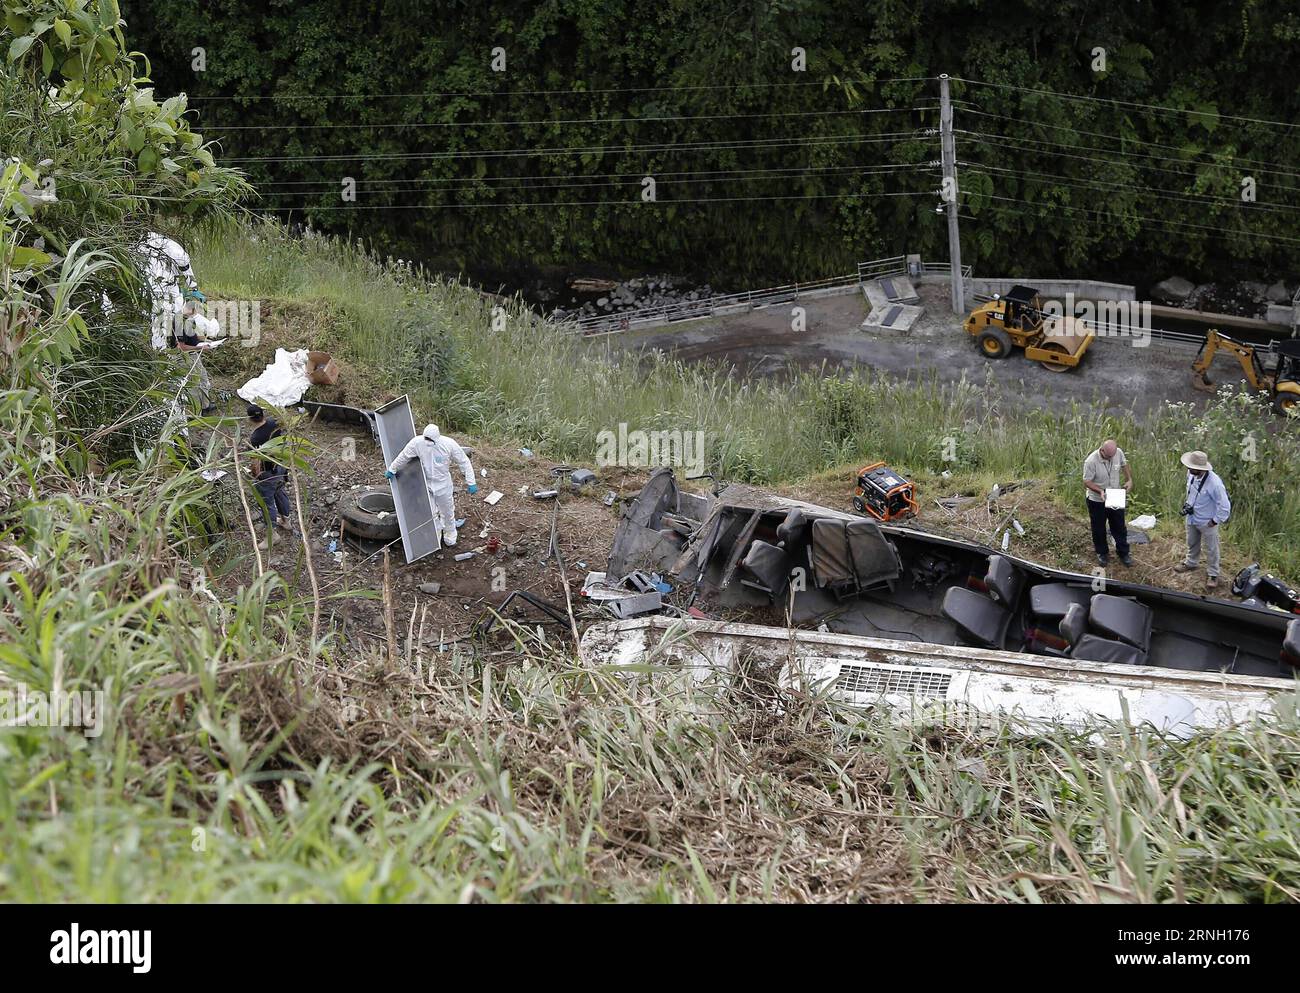 (161021) -- CINCHONA, Oct. 21, 2016 -- Officials work at the site where a bus fell off a 20-meter ditch near the town of Cinchona in the province of Alajuela, Costa Rica, on Oct. 20, 2016. At least 12 people were killed and 18 others injured in Costa Rica on Thursday when a bus carrying 30 tourists fell off a 20-meter ditch. Costa Rican President Luis Guillermo Solis declared three days of national mourning on Oct. 20-22, during which the national flag would be flown at half mast. Kent Gilbert) (fnc) (ce)(yy) COSTA RICA-CINCHONA-ACCIDENT-BUS e KENTxGILBERT PUBLICATIONxNOTxINxCHN   Cinchona OCT Stock Photo